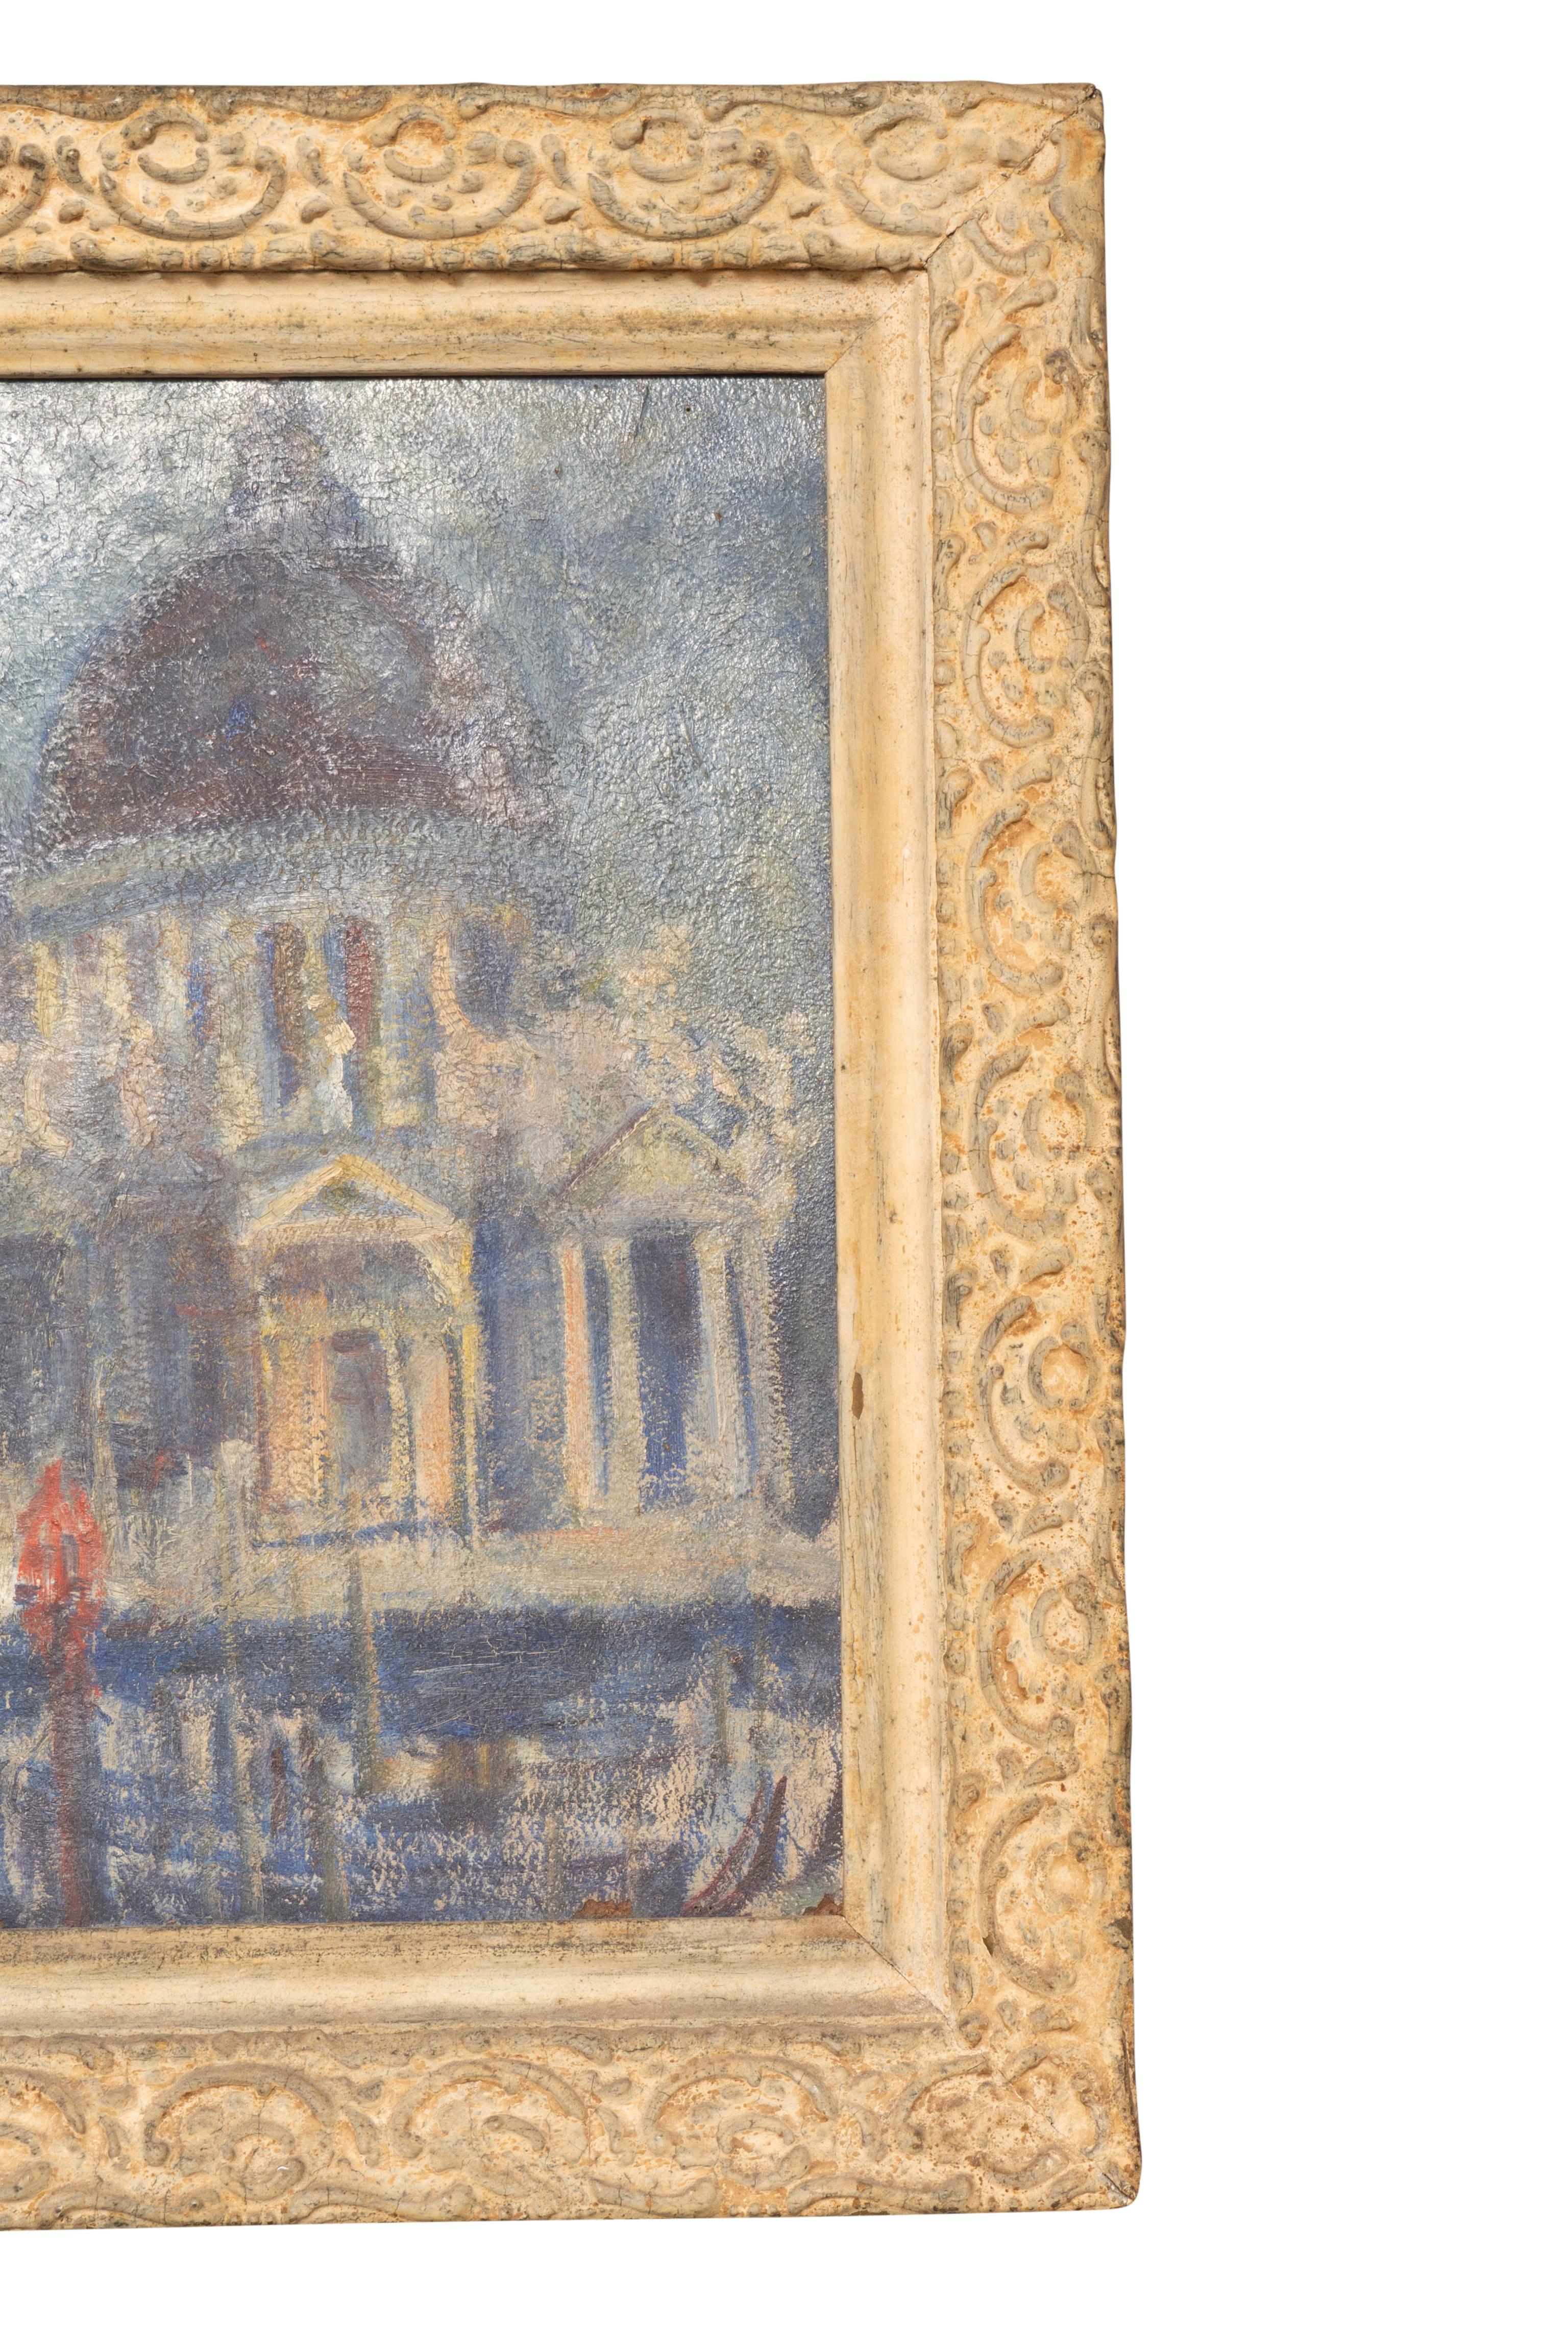 Hand-Painted Oil On Panel Of Santa Maria della Salute In Venice For Sale